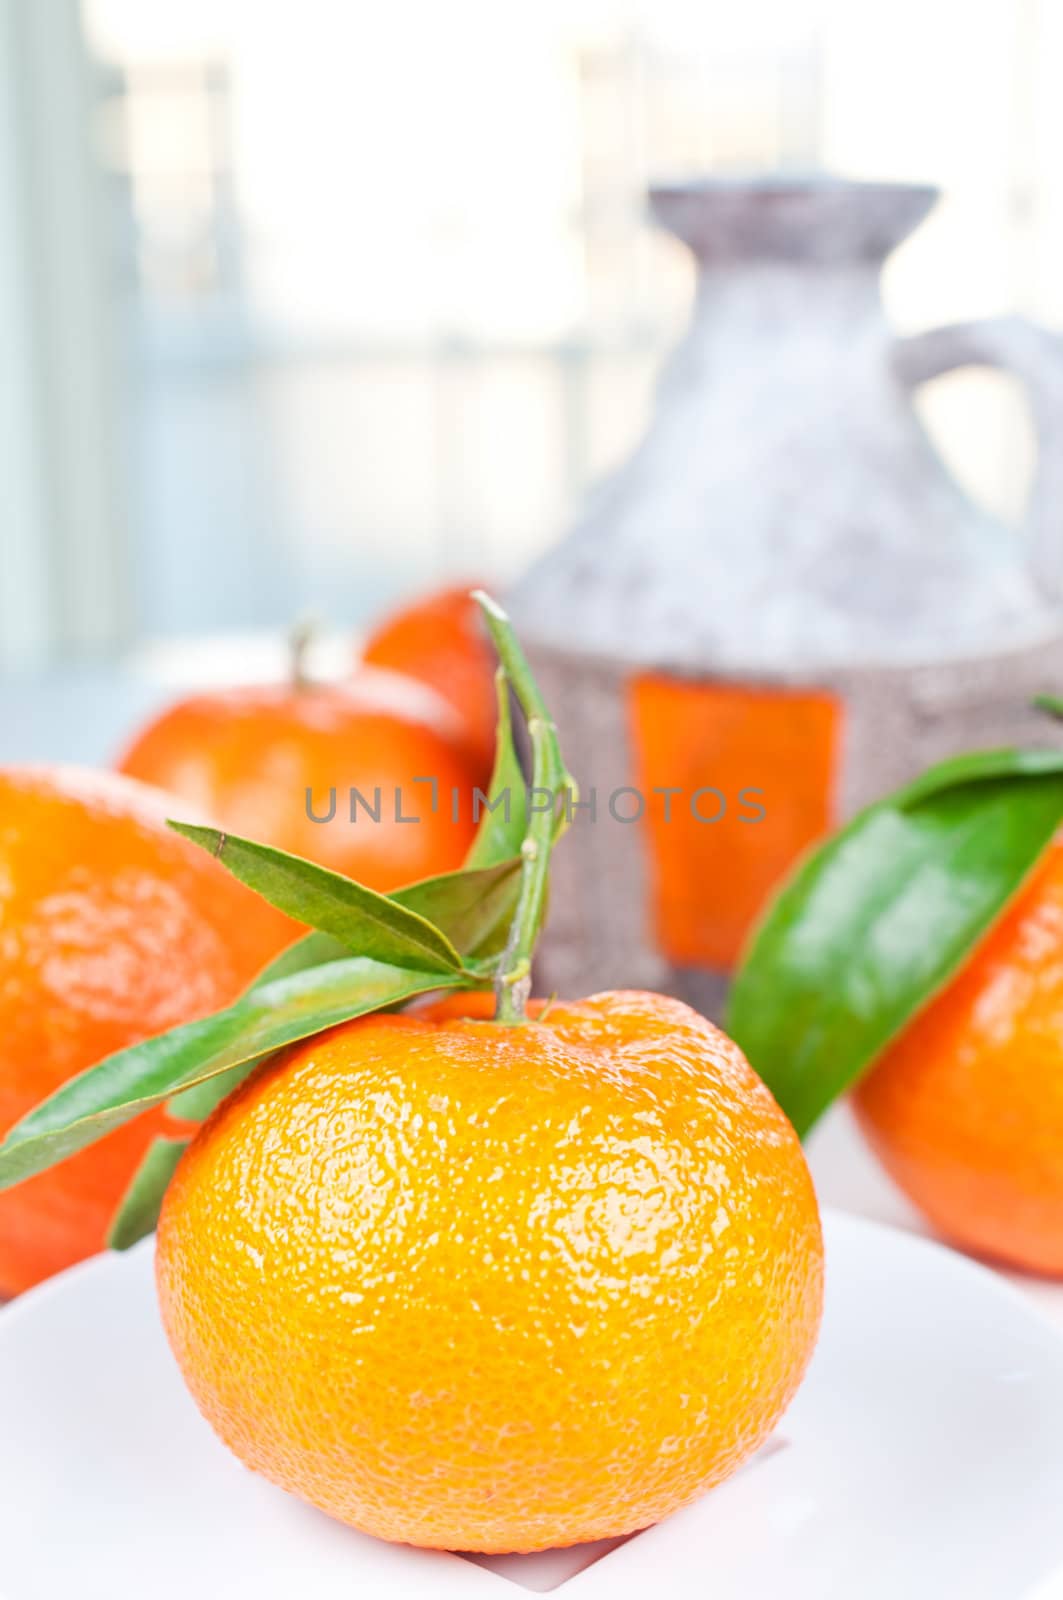 Tangerine with green leaves on a saucer pitcher background